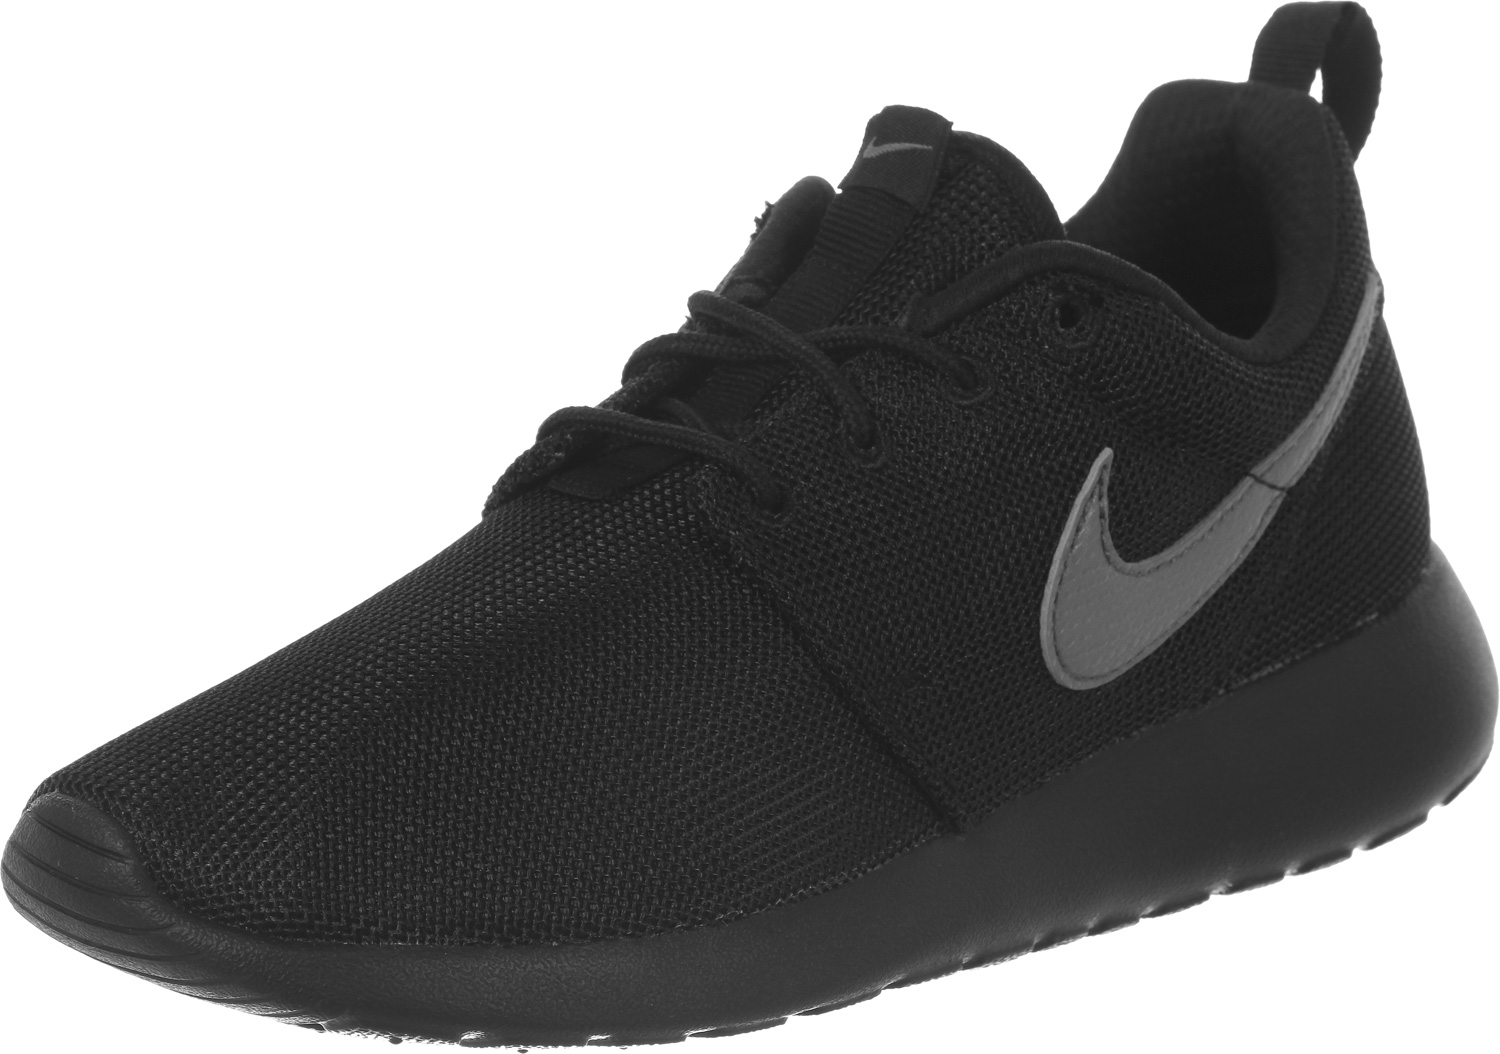 nike roshe run youth gs chaussures gris, Nike Roshe One Youth GS chaussures enfants noir